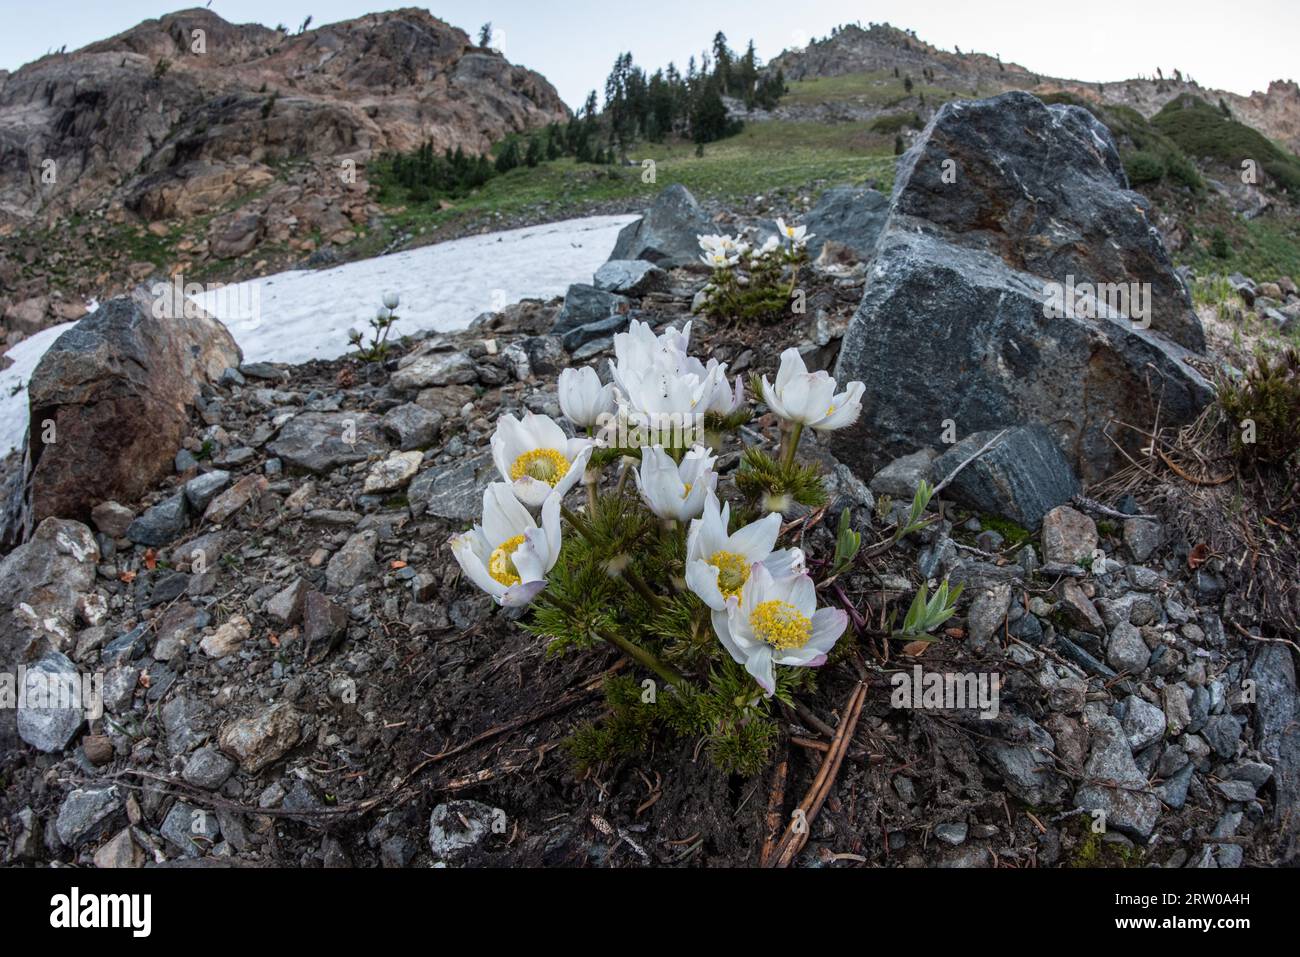 Anemone occidentalis, the white or western pasqueflower grows after the snow melt in the Trinity alps wilderness of Northern California, USA. Stock Photo